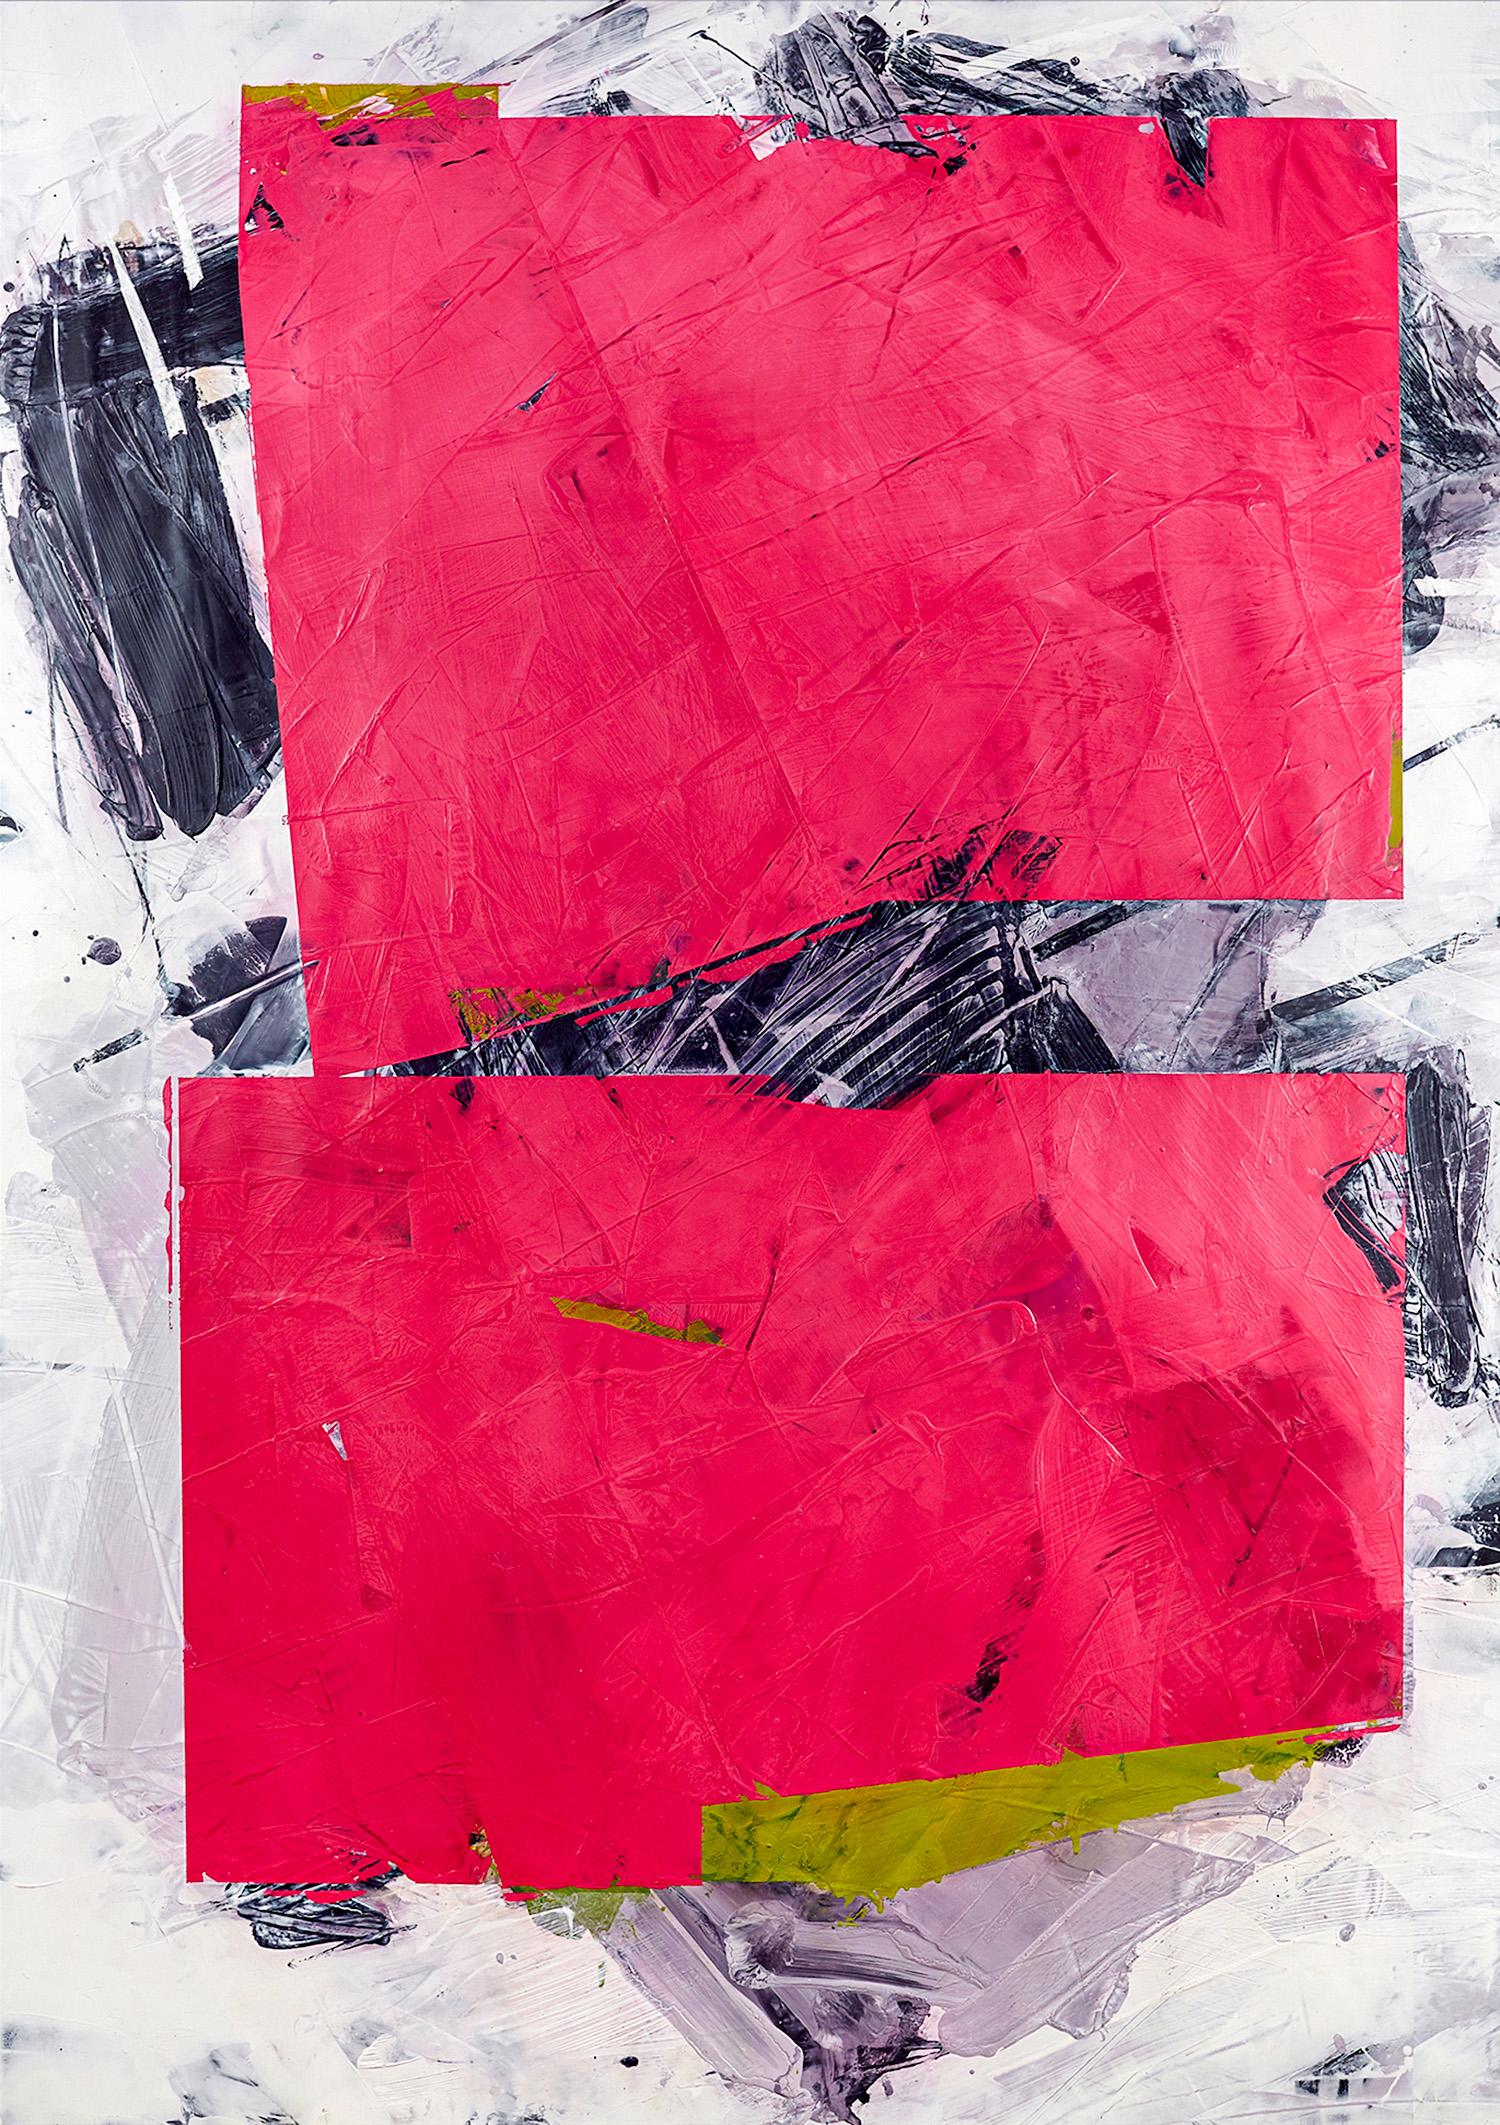 Ivo Stoyanov Abstract Painting - Crimson No 2 - large, bold, abstract shapes, marble dust, acrylic, wax on canvas